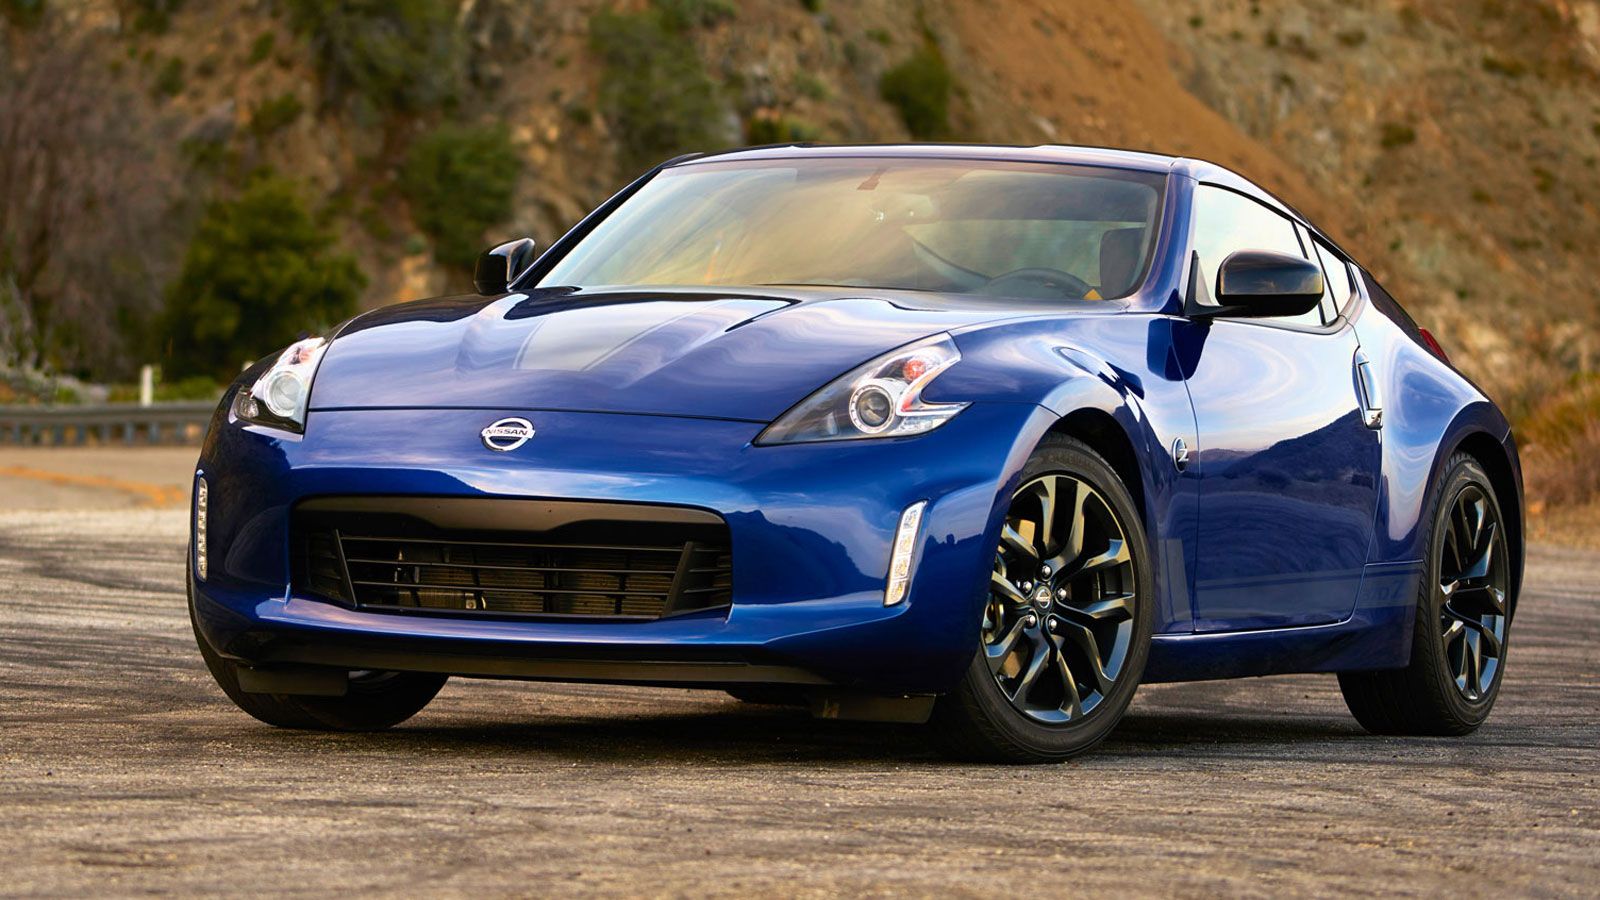 2019 Nissan 370Z Heritage Edition essentials: The engine is all you need